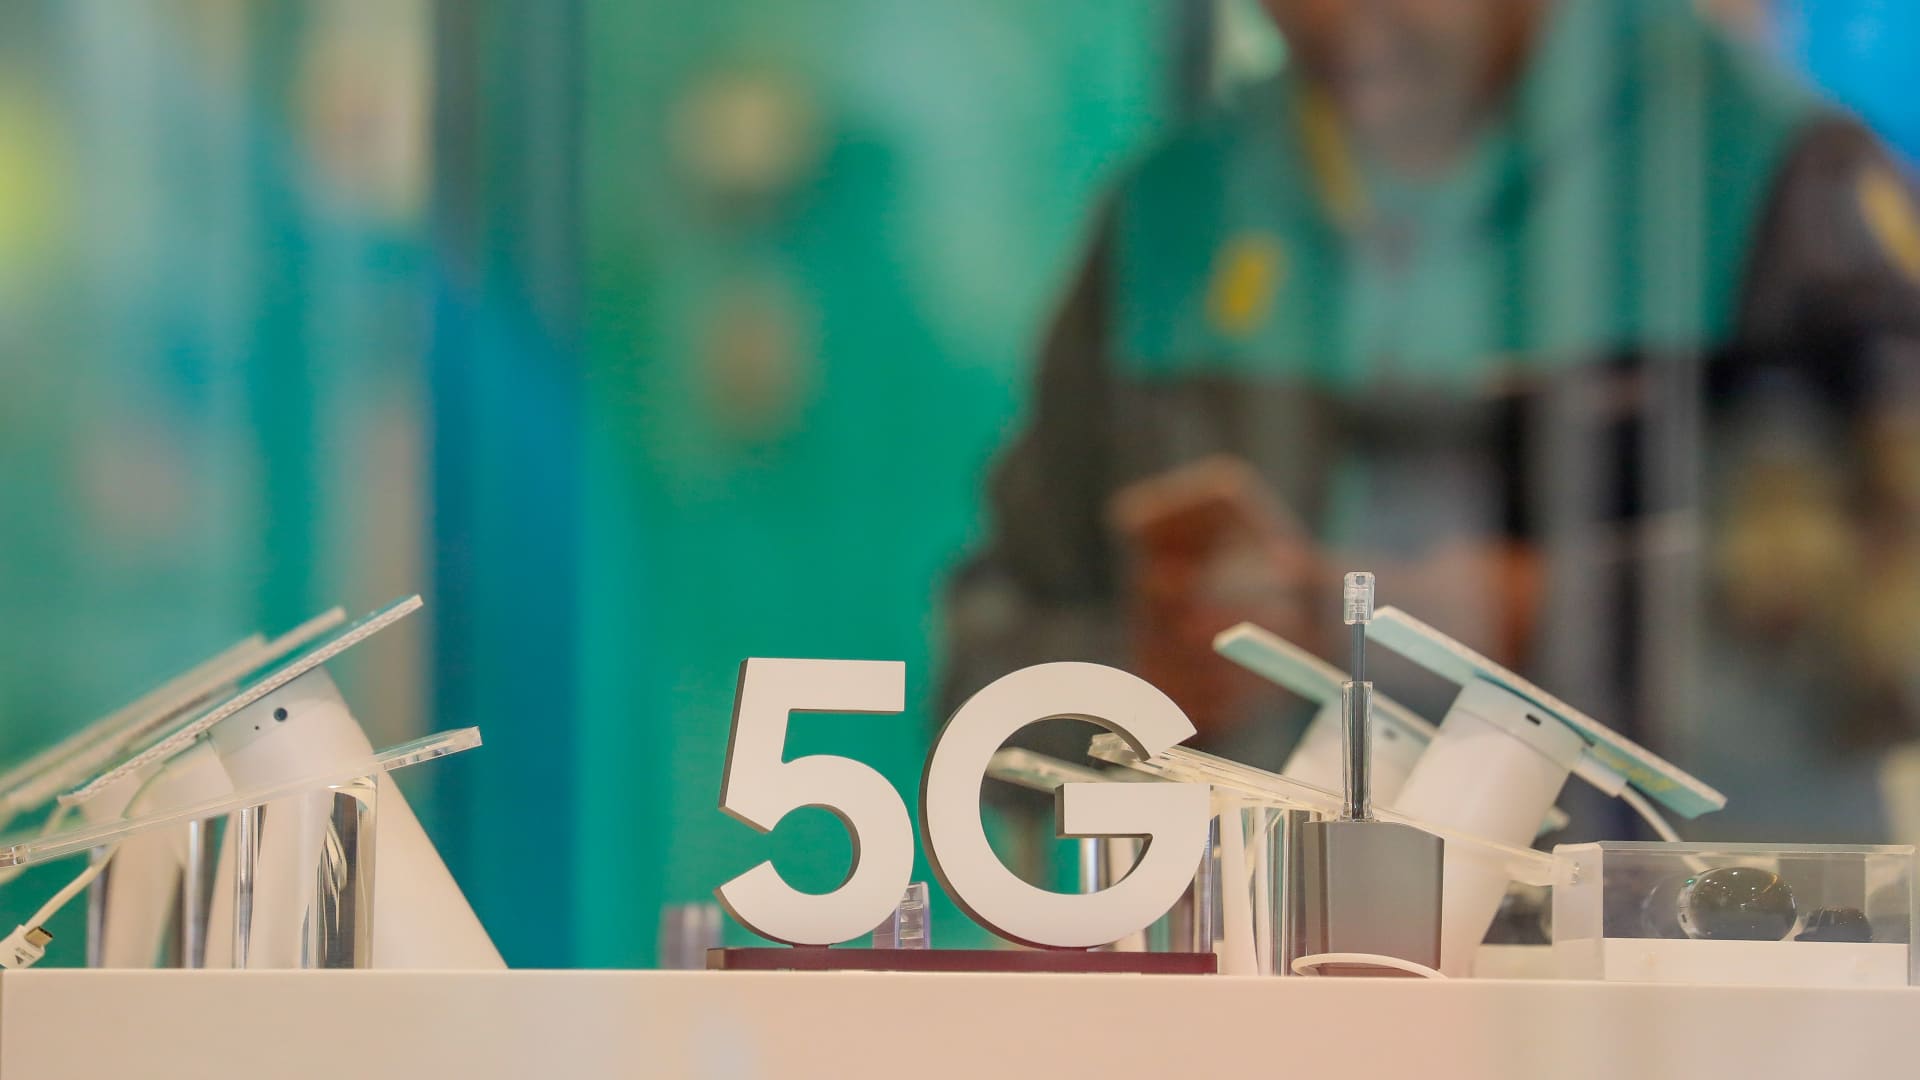 British telco giant BT expects to launch 5G stand-alone — or 'true' 5G — later this year